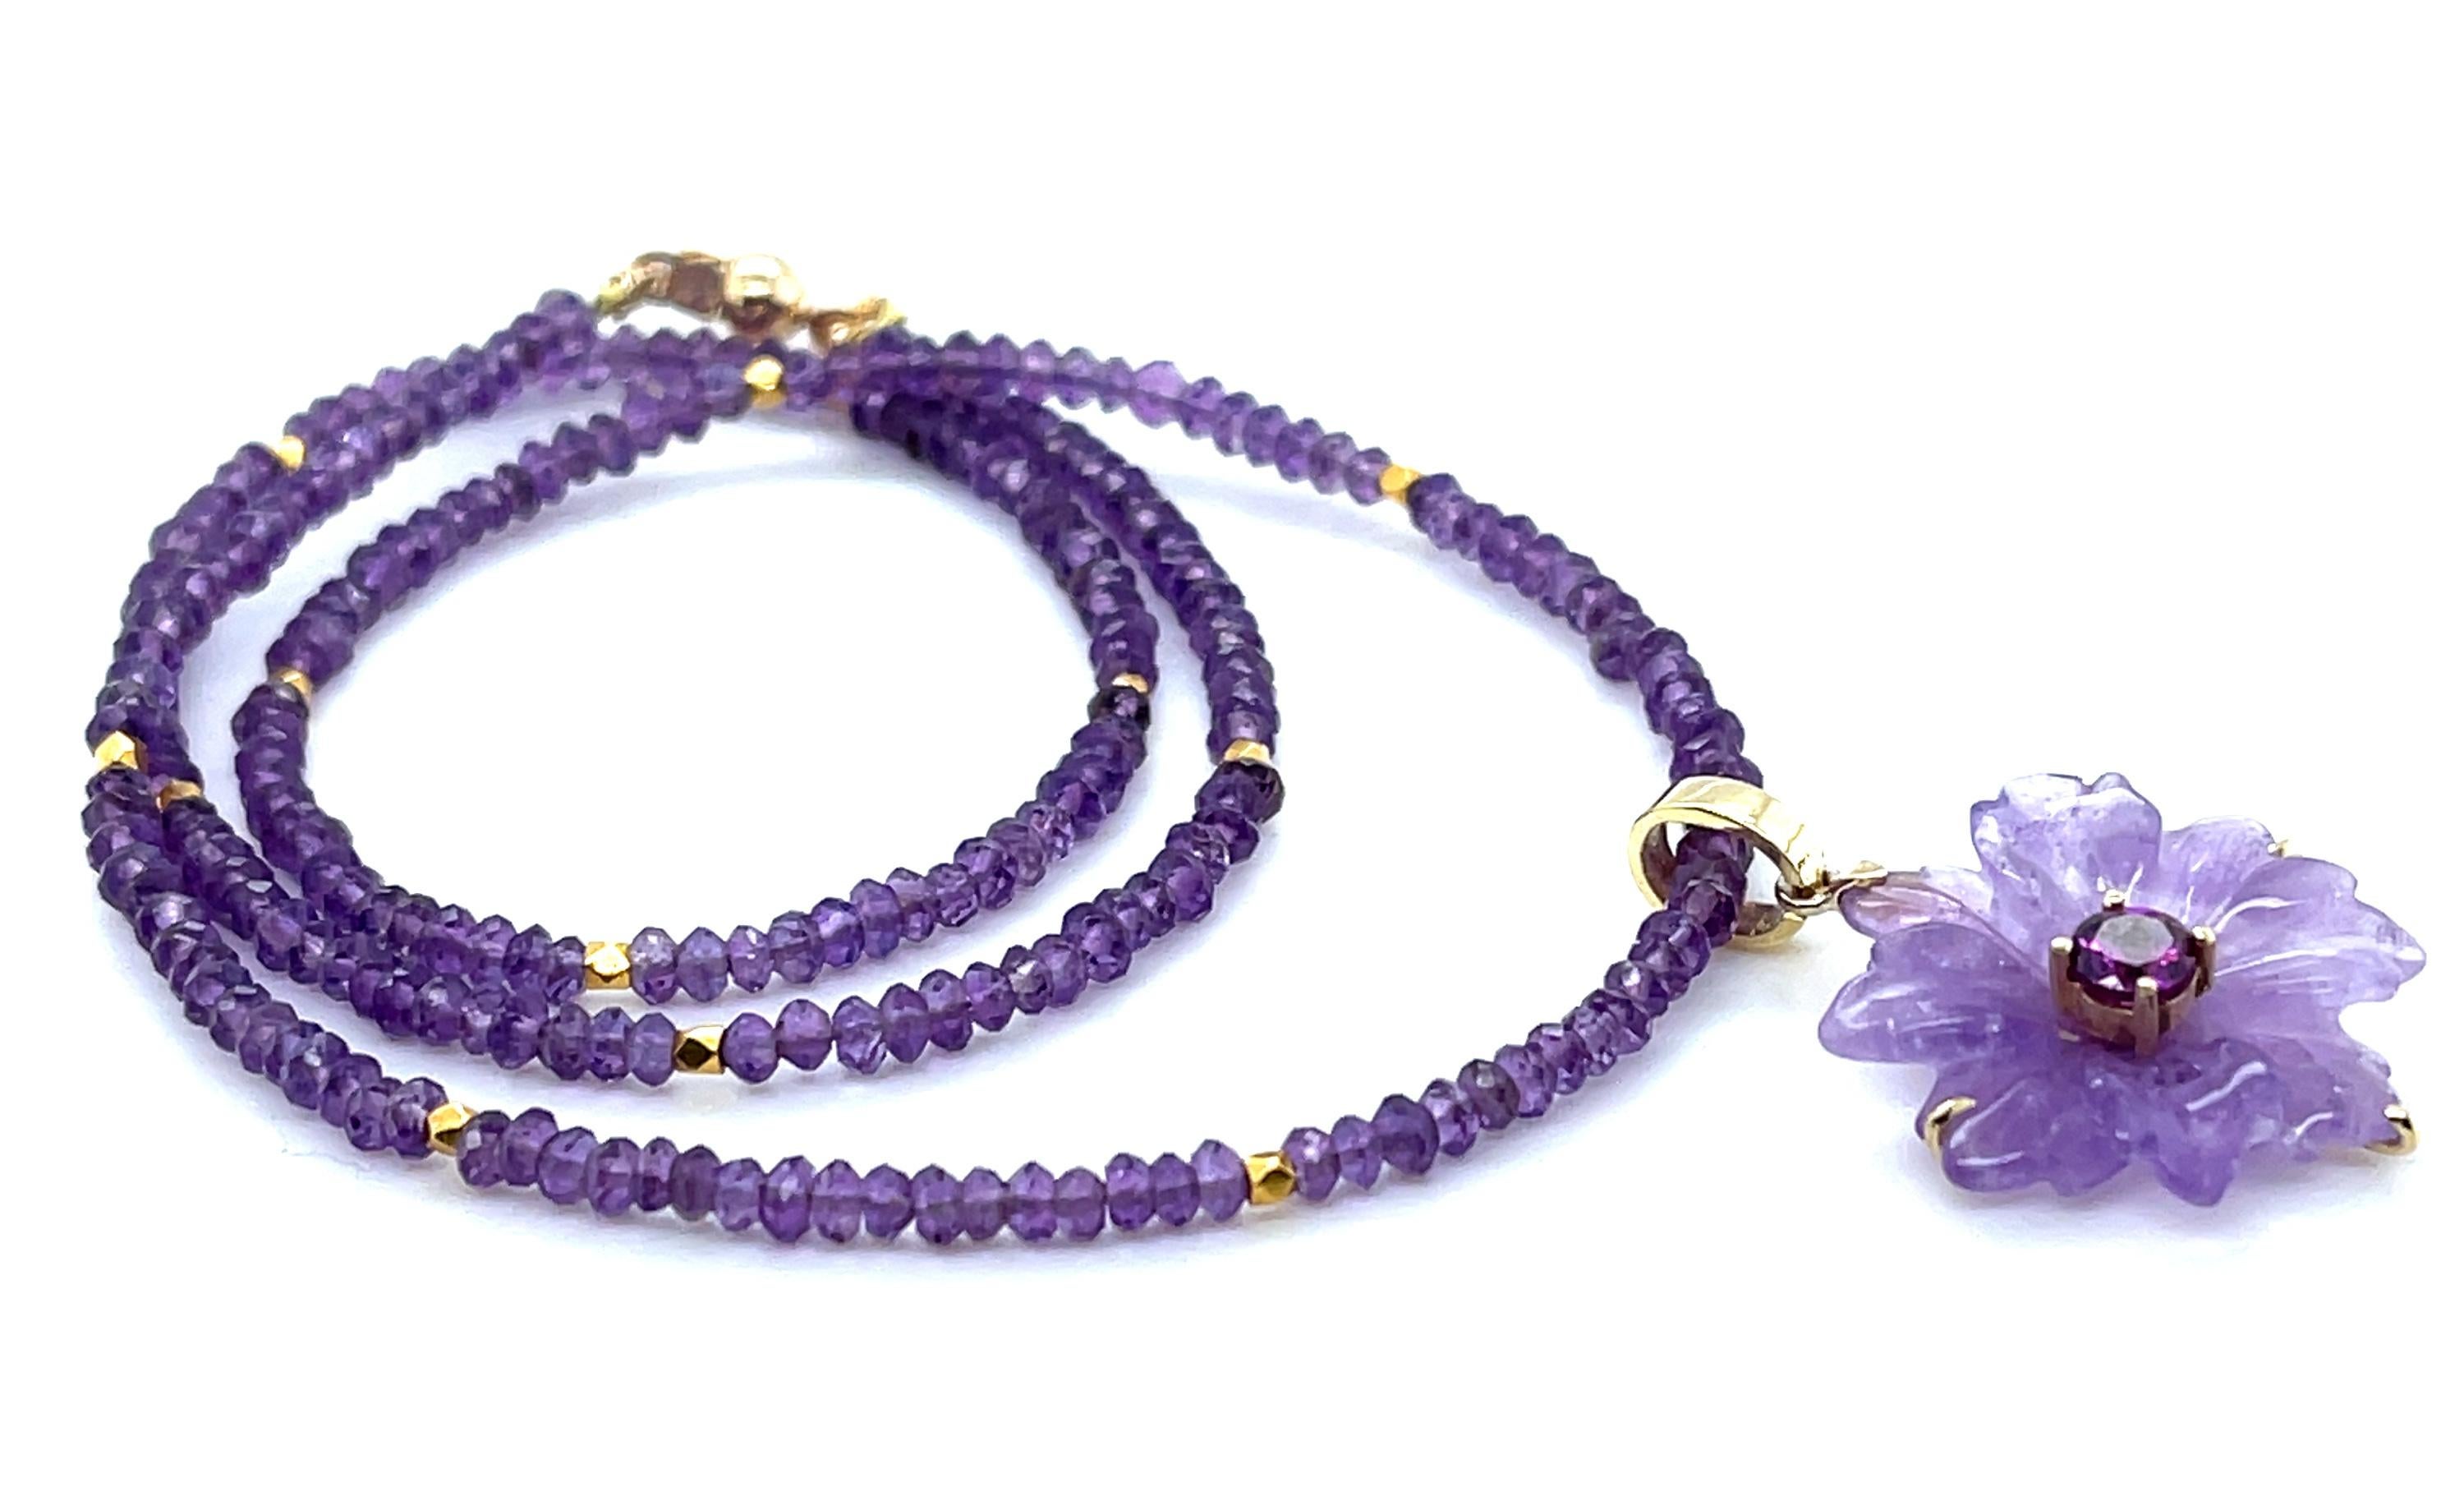 This unique necklace features a beautiful floral amethyst pendant set in 18k yellow gold on a strand of pastel and royal purple amethyst beads. The flower pendant has been hand carved from a single amethyst crystal with delicate purple color, and in